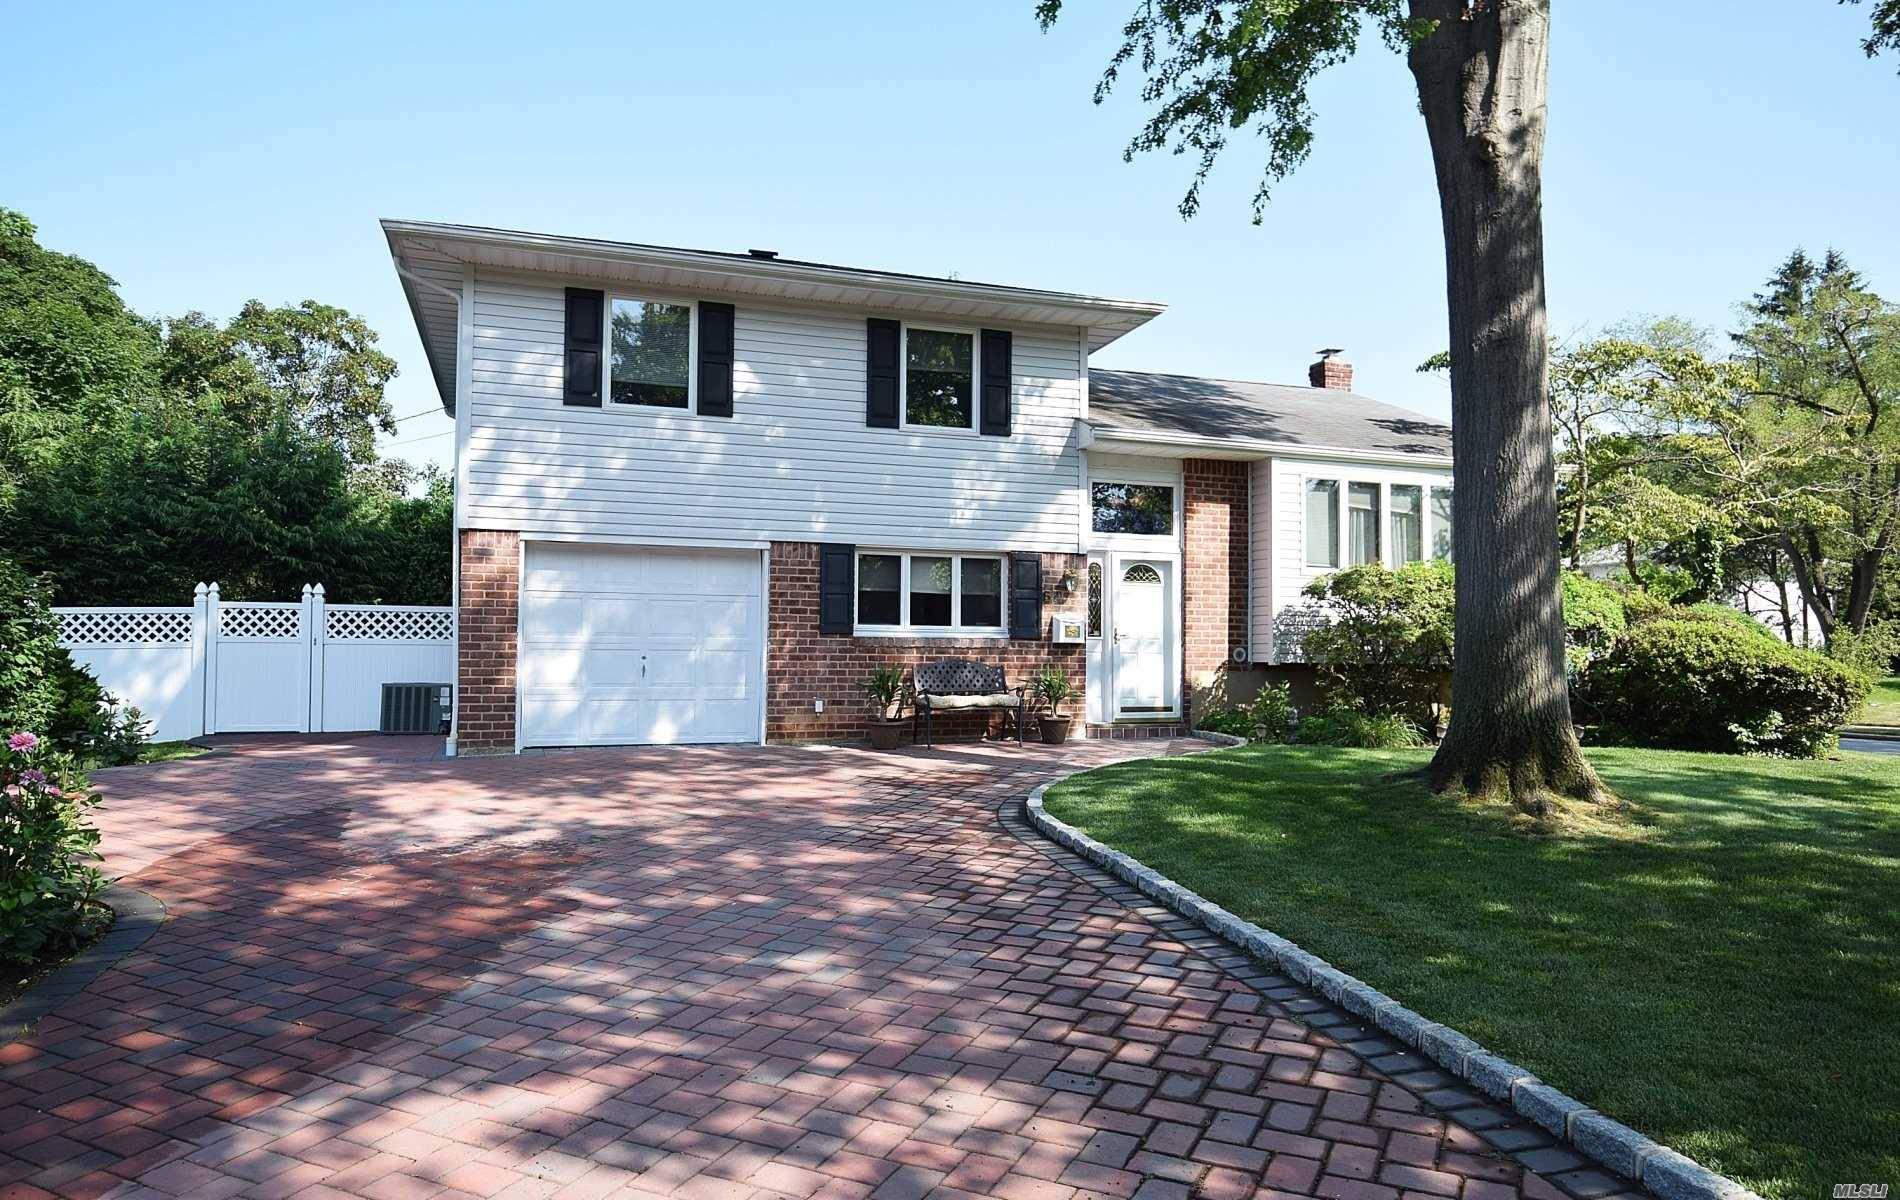 Immaculate Clean Split Home in Quiet Location, Move in Ready, Mostly Renovated 2010, New Eik Sliders to outside Deck, New Baths, Beautiful New Hardwood Floors, Andersen Windows, CAC, New Brick ...